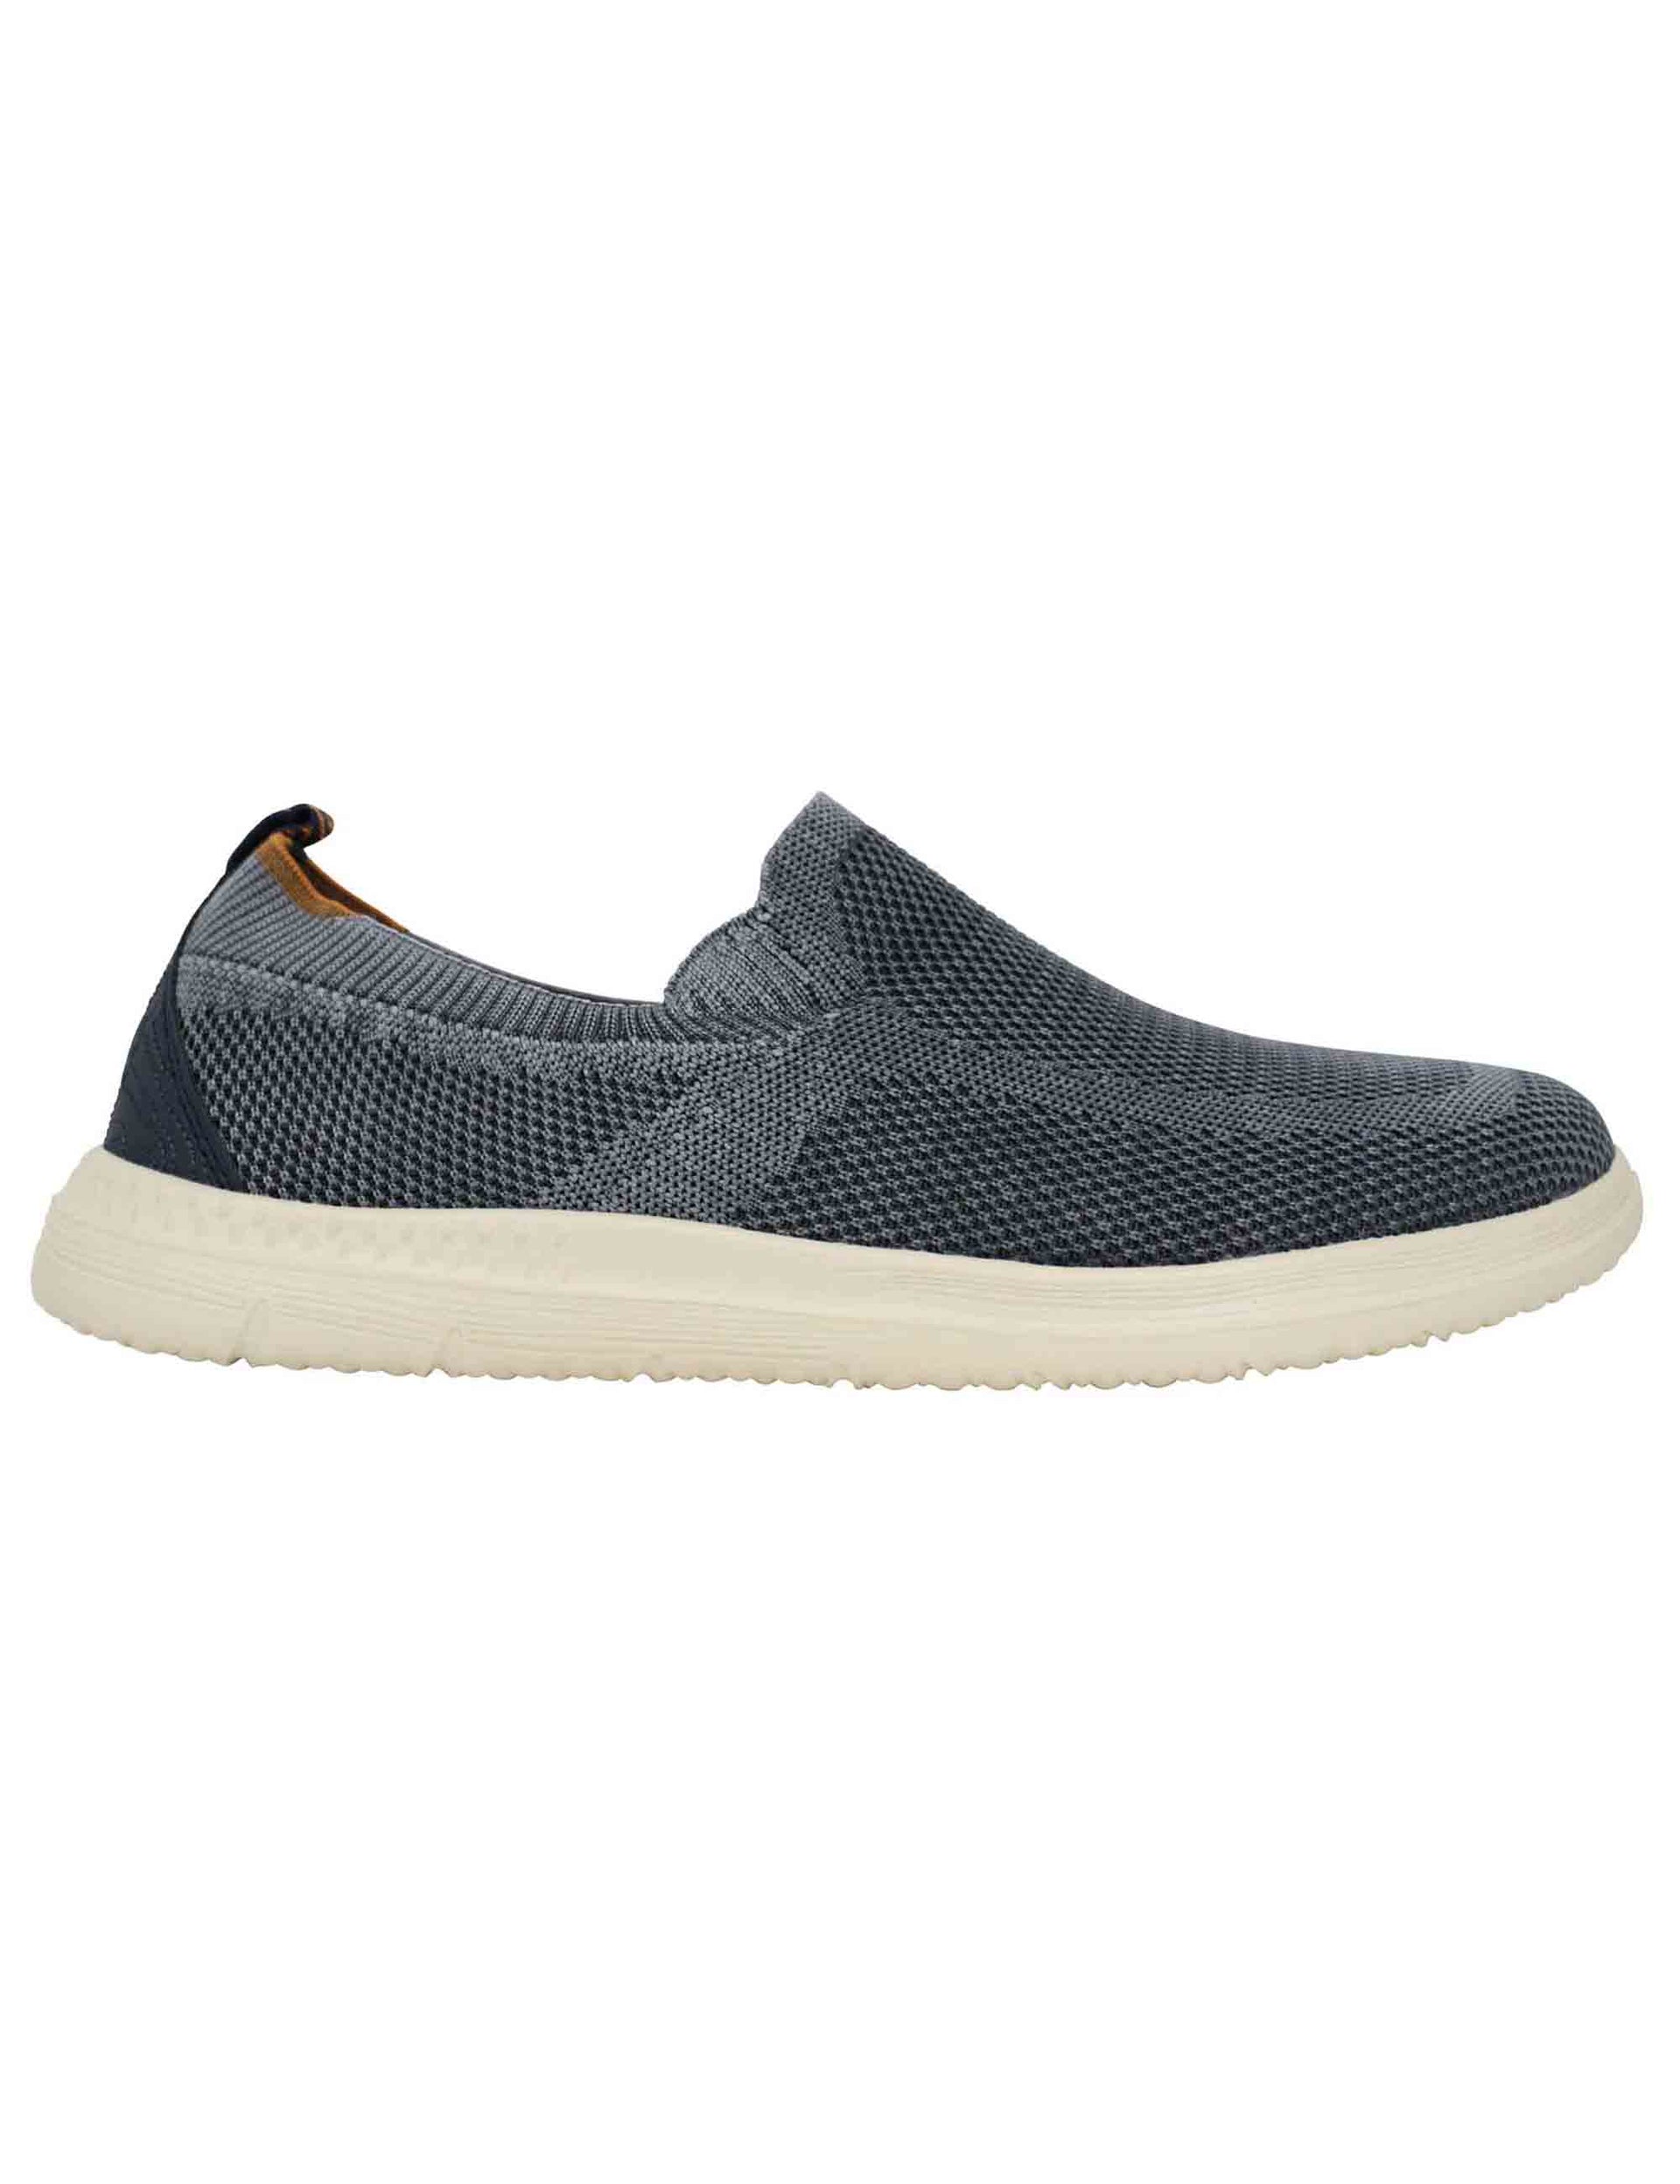 Karoo men's slip on moccasins in blue fabric with rubber sole